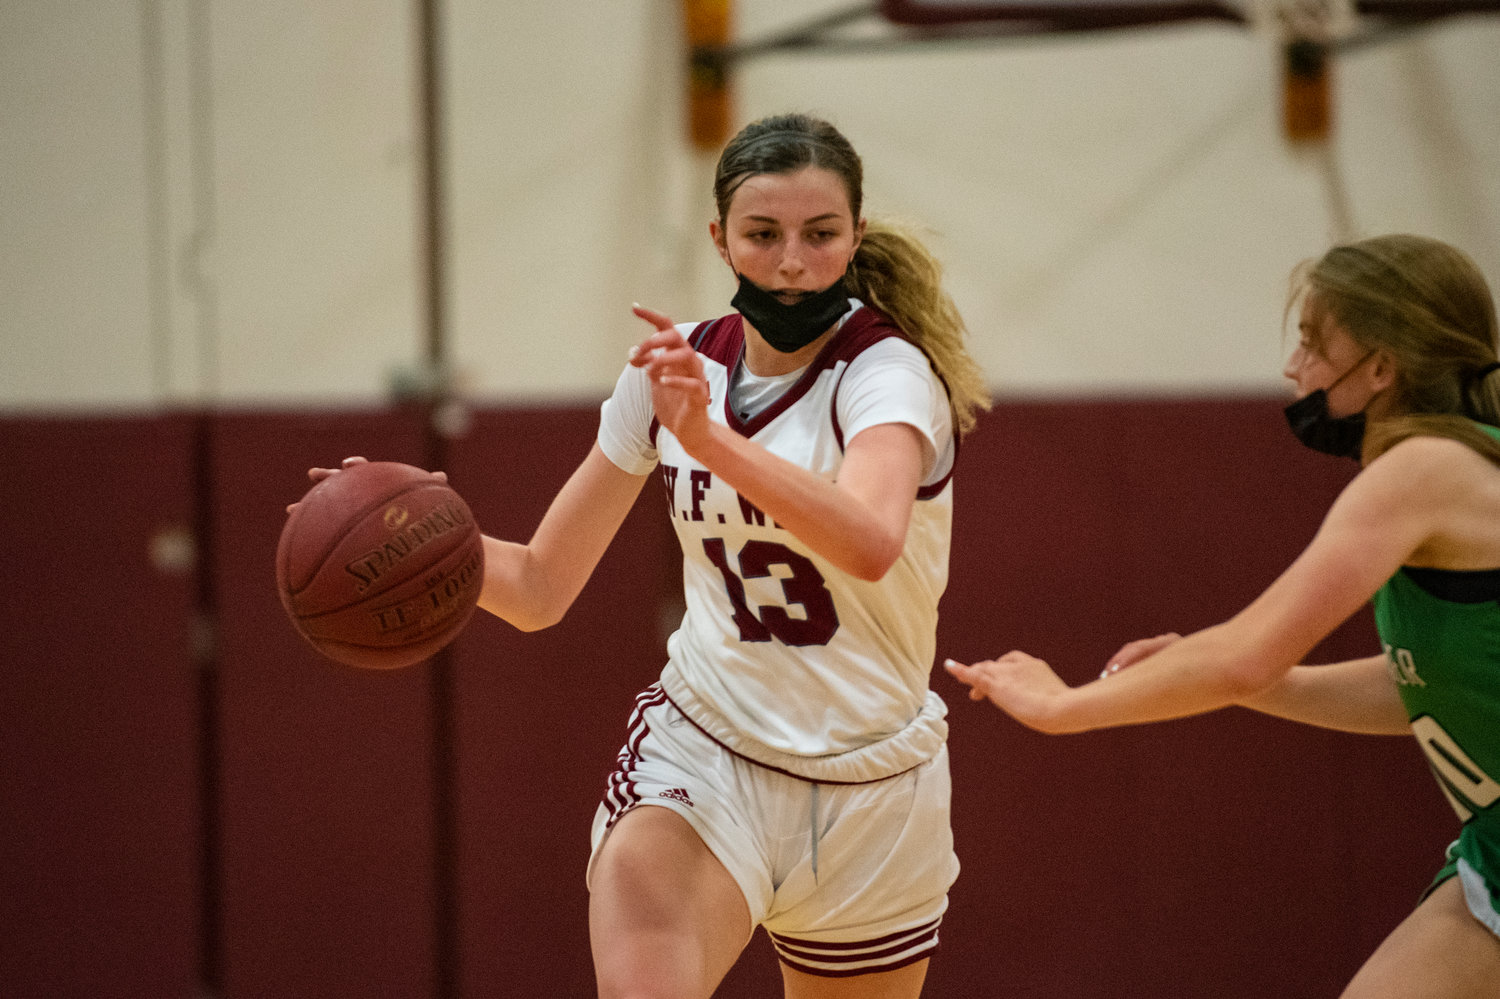 W.F. West's Drea Brumfield (13) was named the 2A Evergreen Conference MVP for the 2021 season.